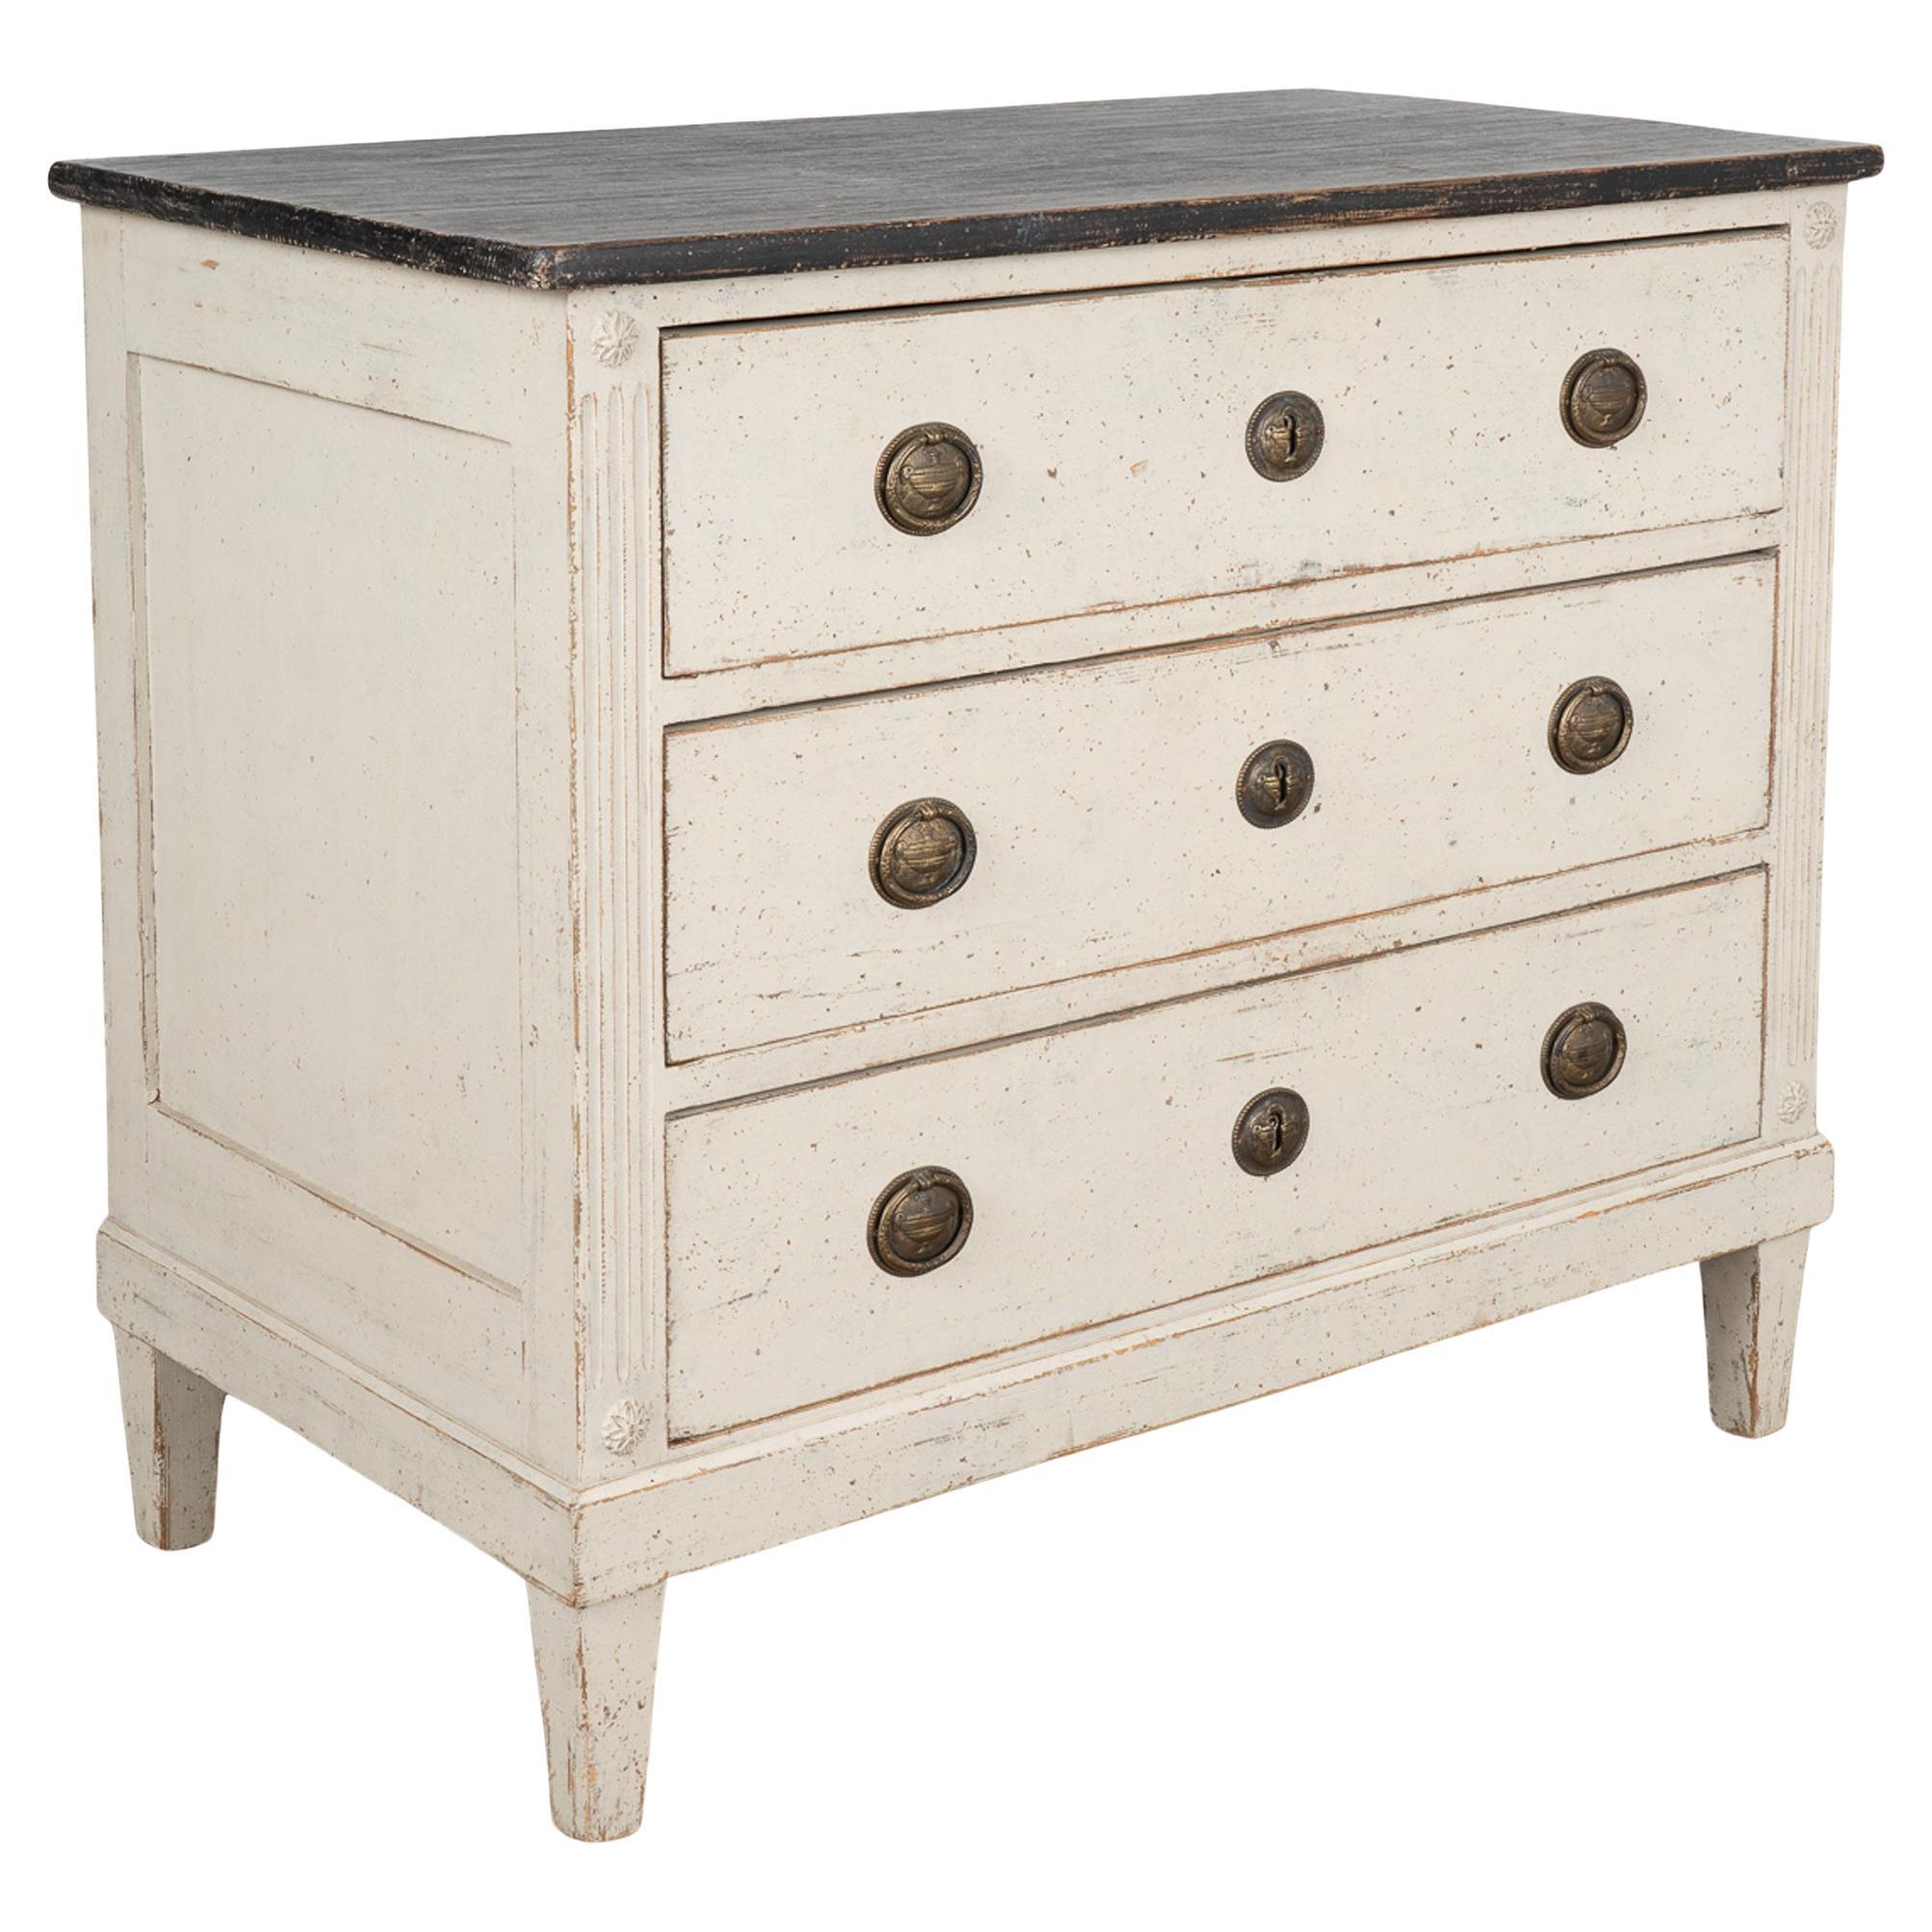 Gray and Black Painted Gustavian Chest of Drawers, Sweden, circa 1840-1860